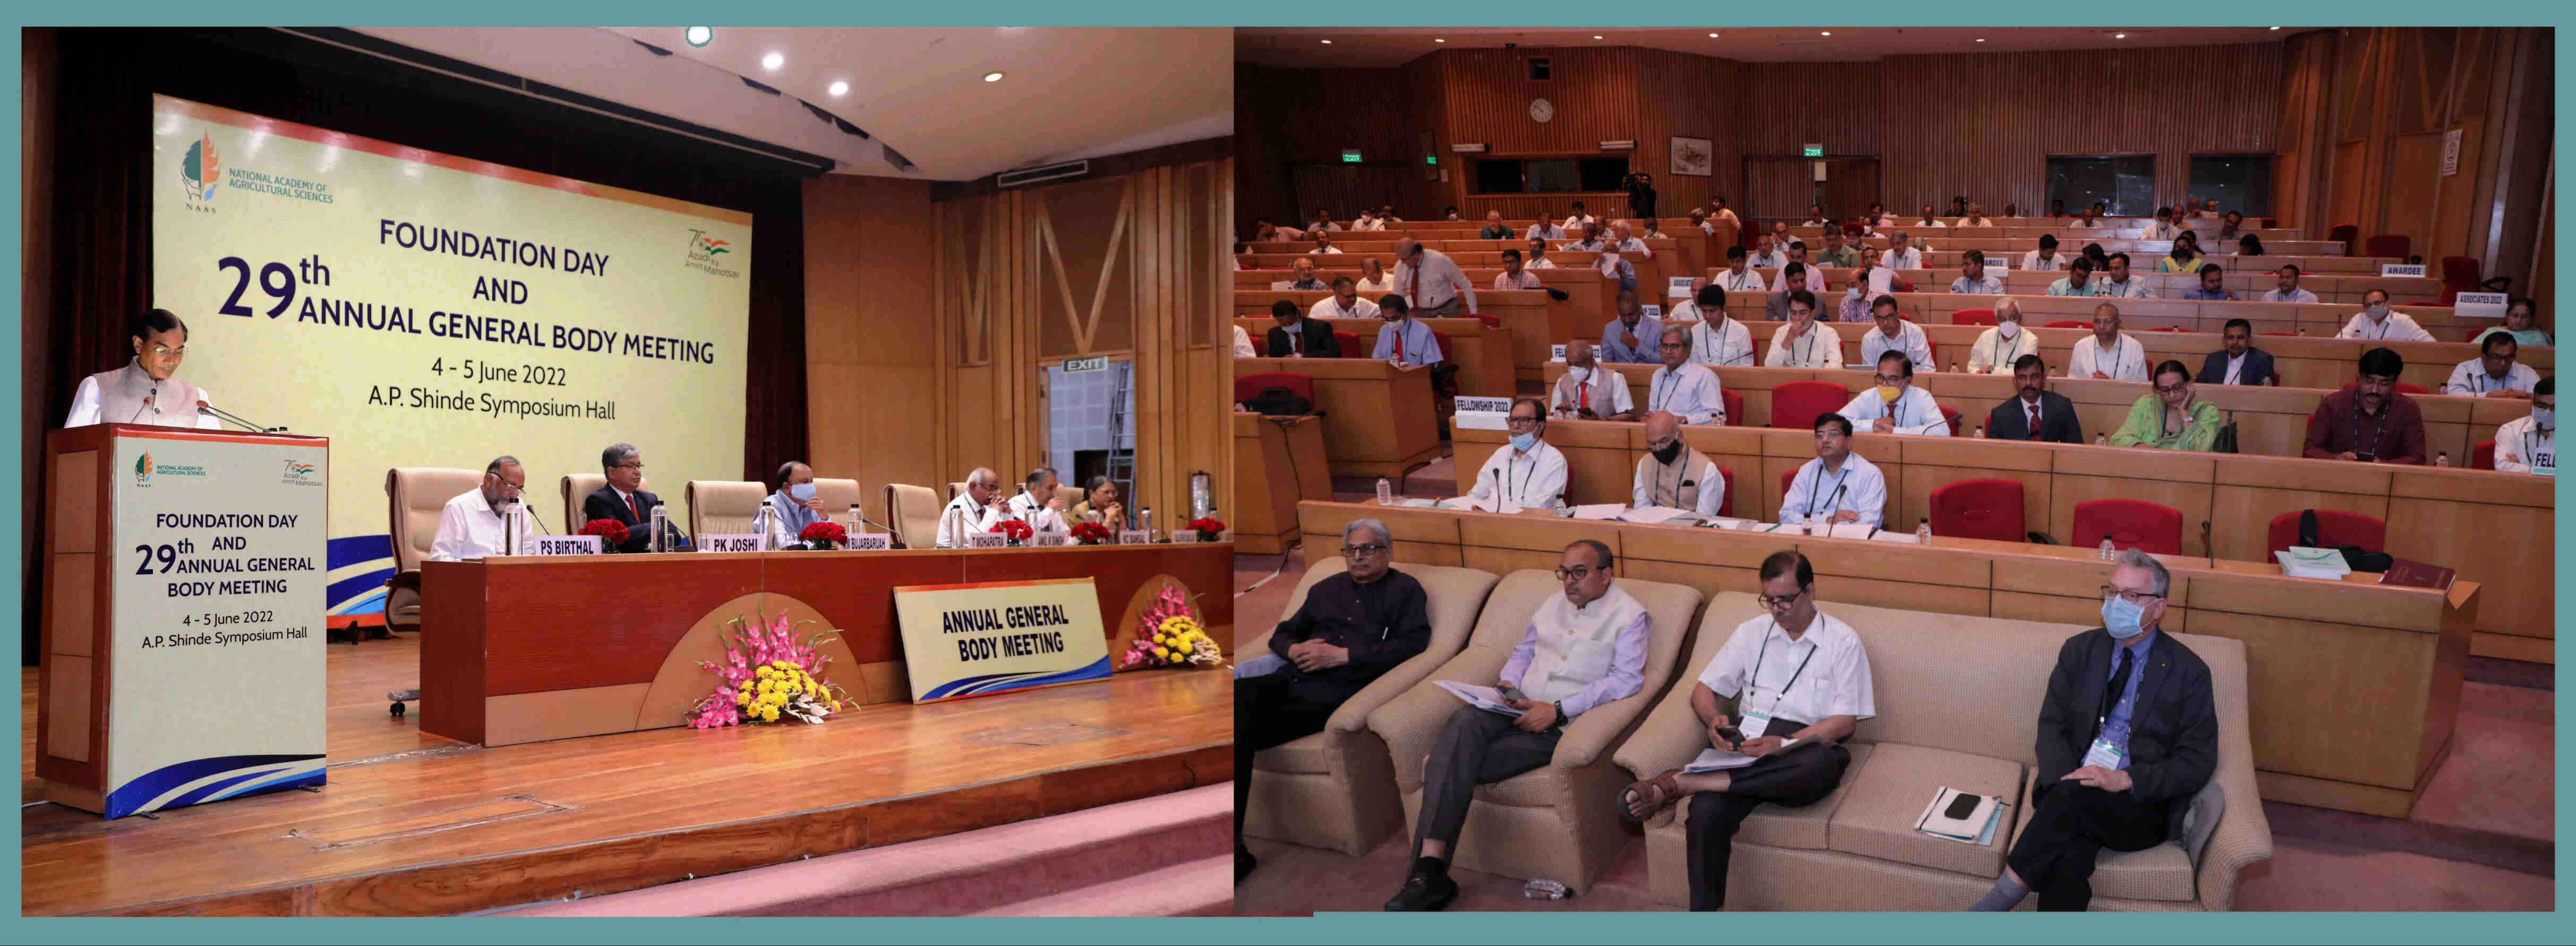 Dr. T. Mohapatra, President delivering Presidential Address on 29th Annual General Body meeting